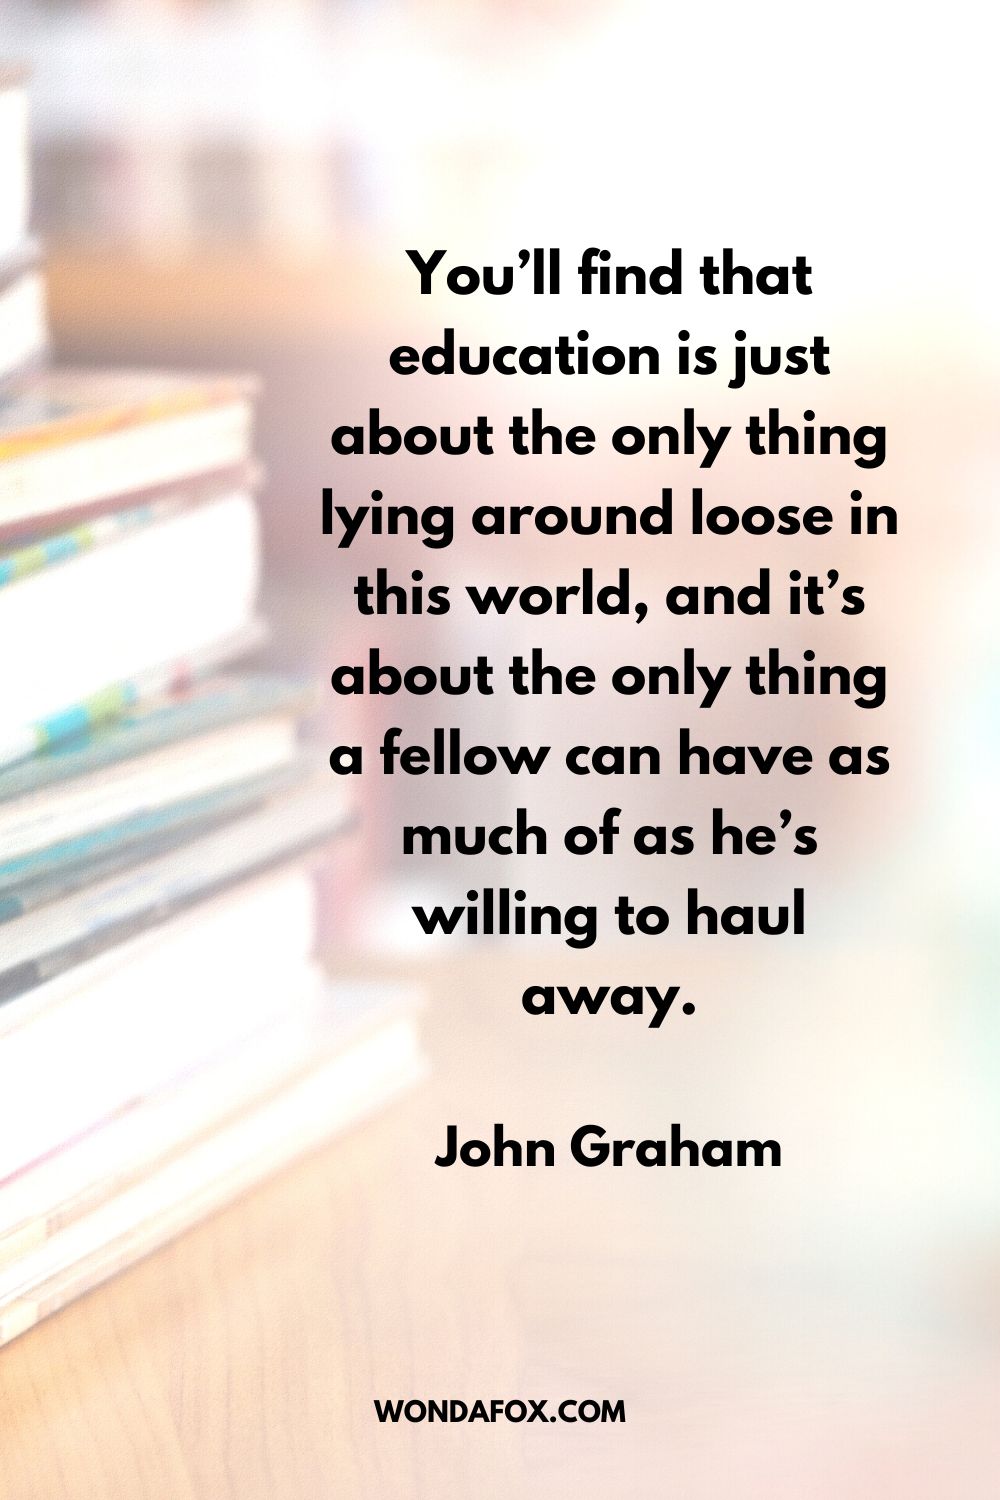 You’ll find that education is just about the only thing lying around loose in this world, and it’s about the only thing a fellow can have as much of as he’s willing to haul away. John Graham